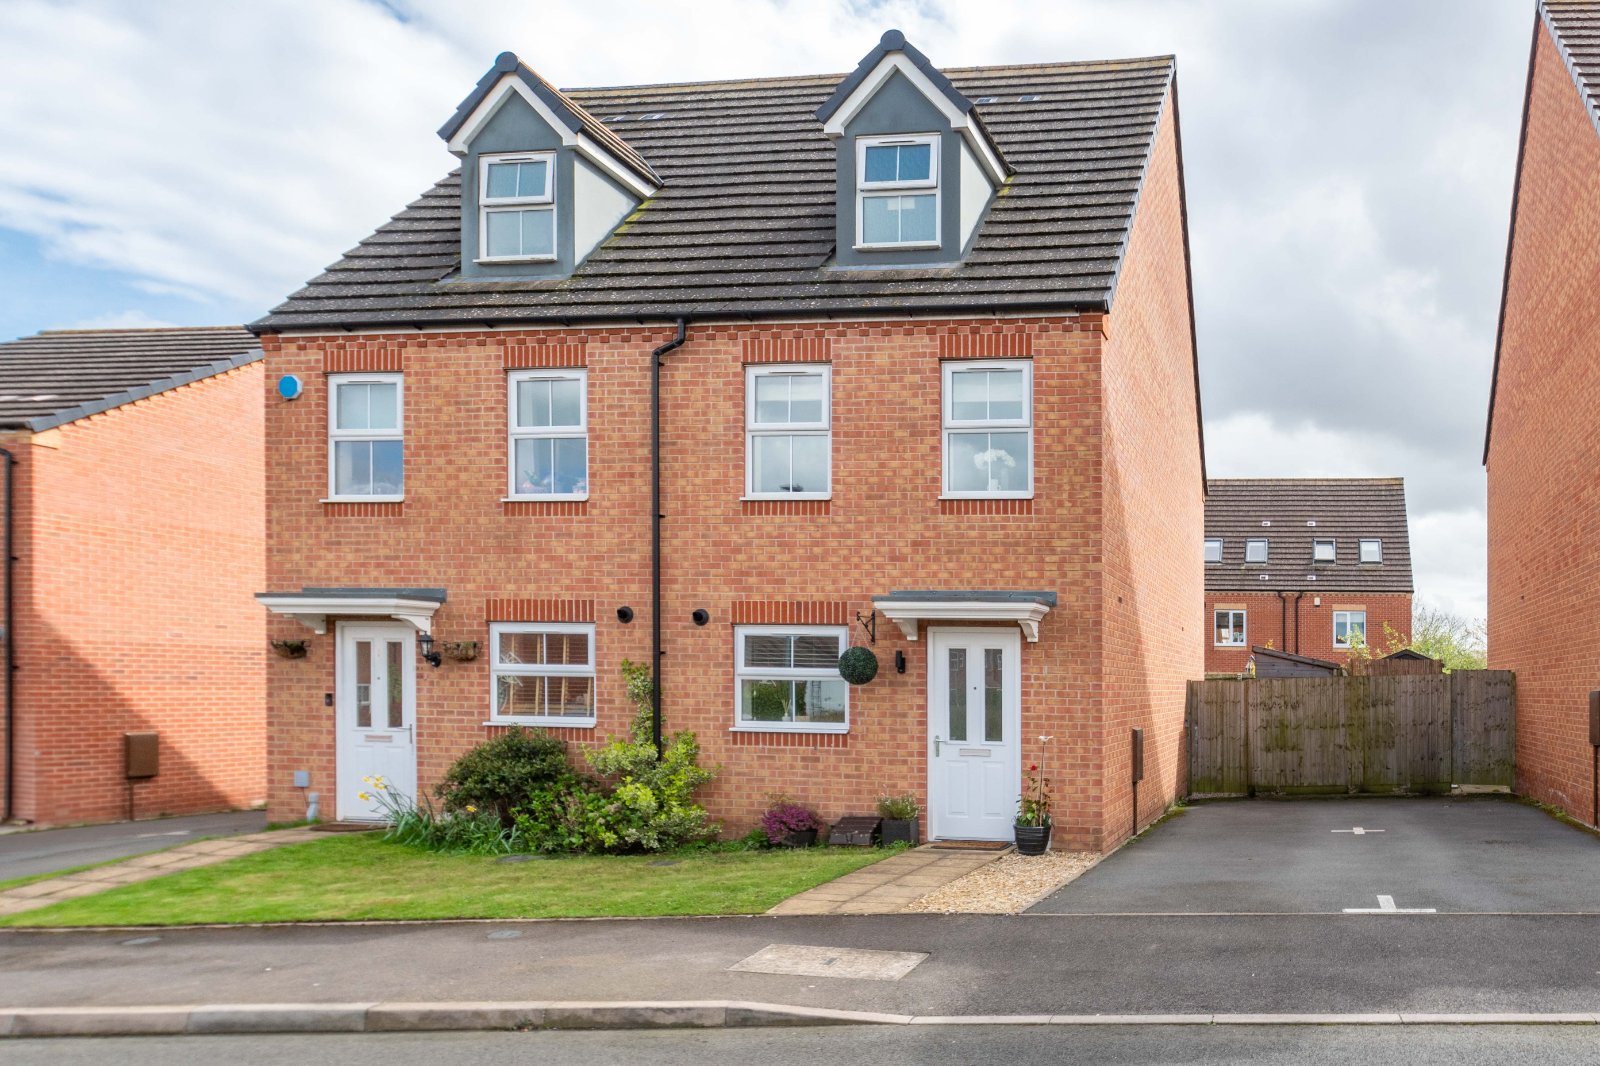 3 bed house for sale in Kemble Street, Redditch - Property Image 1